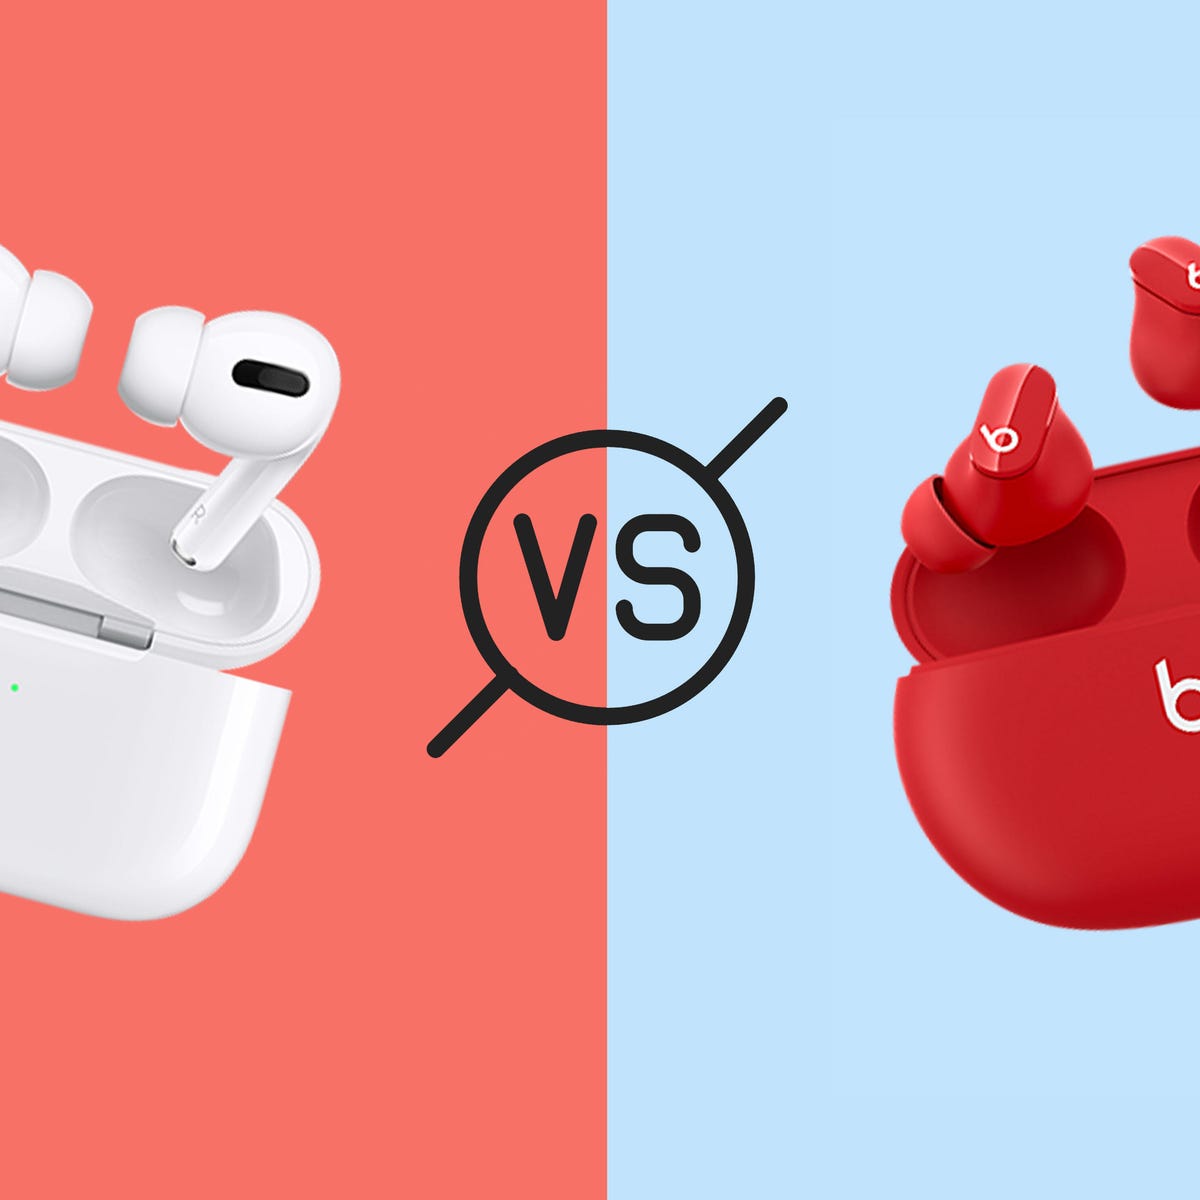 Kostume afdeling atom Beats Studio Buds vs. Apple AirPods Pro 2: Which should you buy? | ZDNET